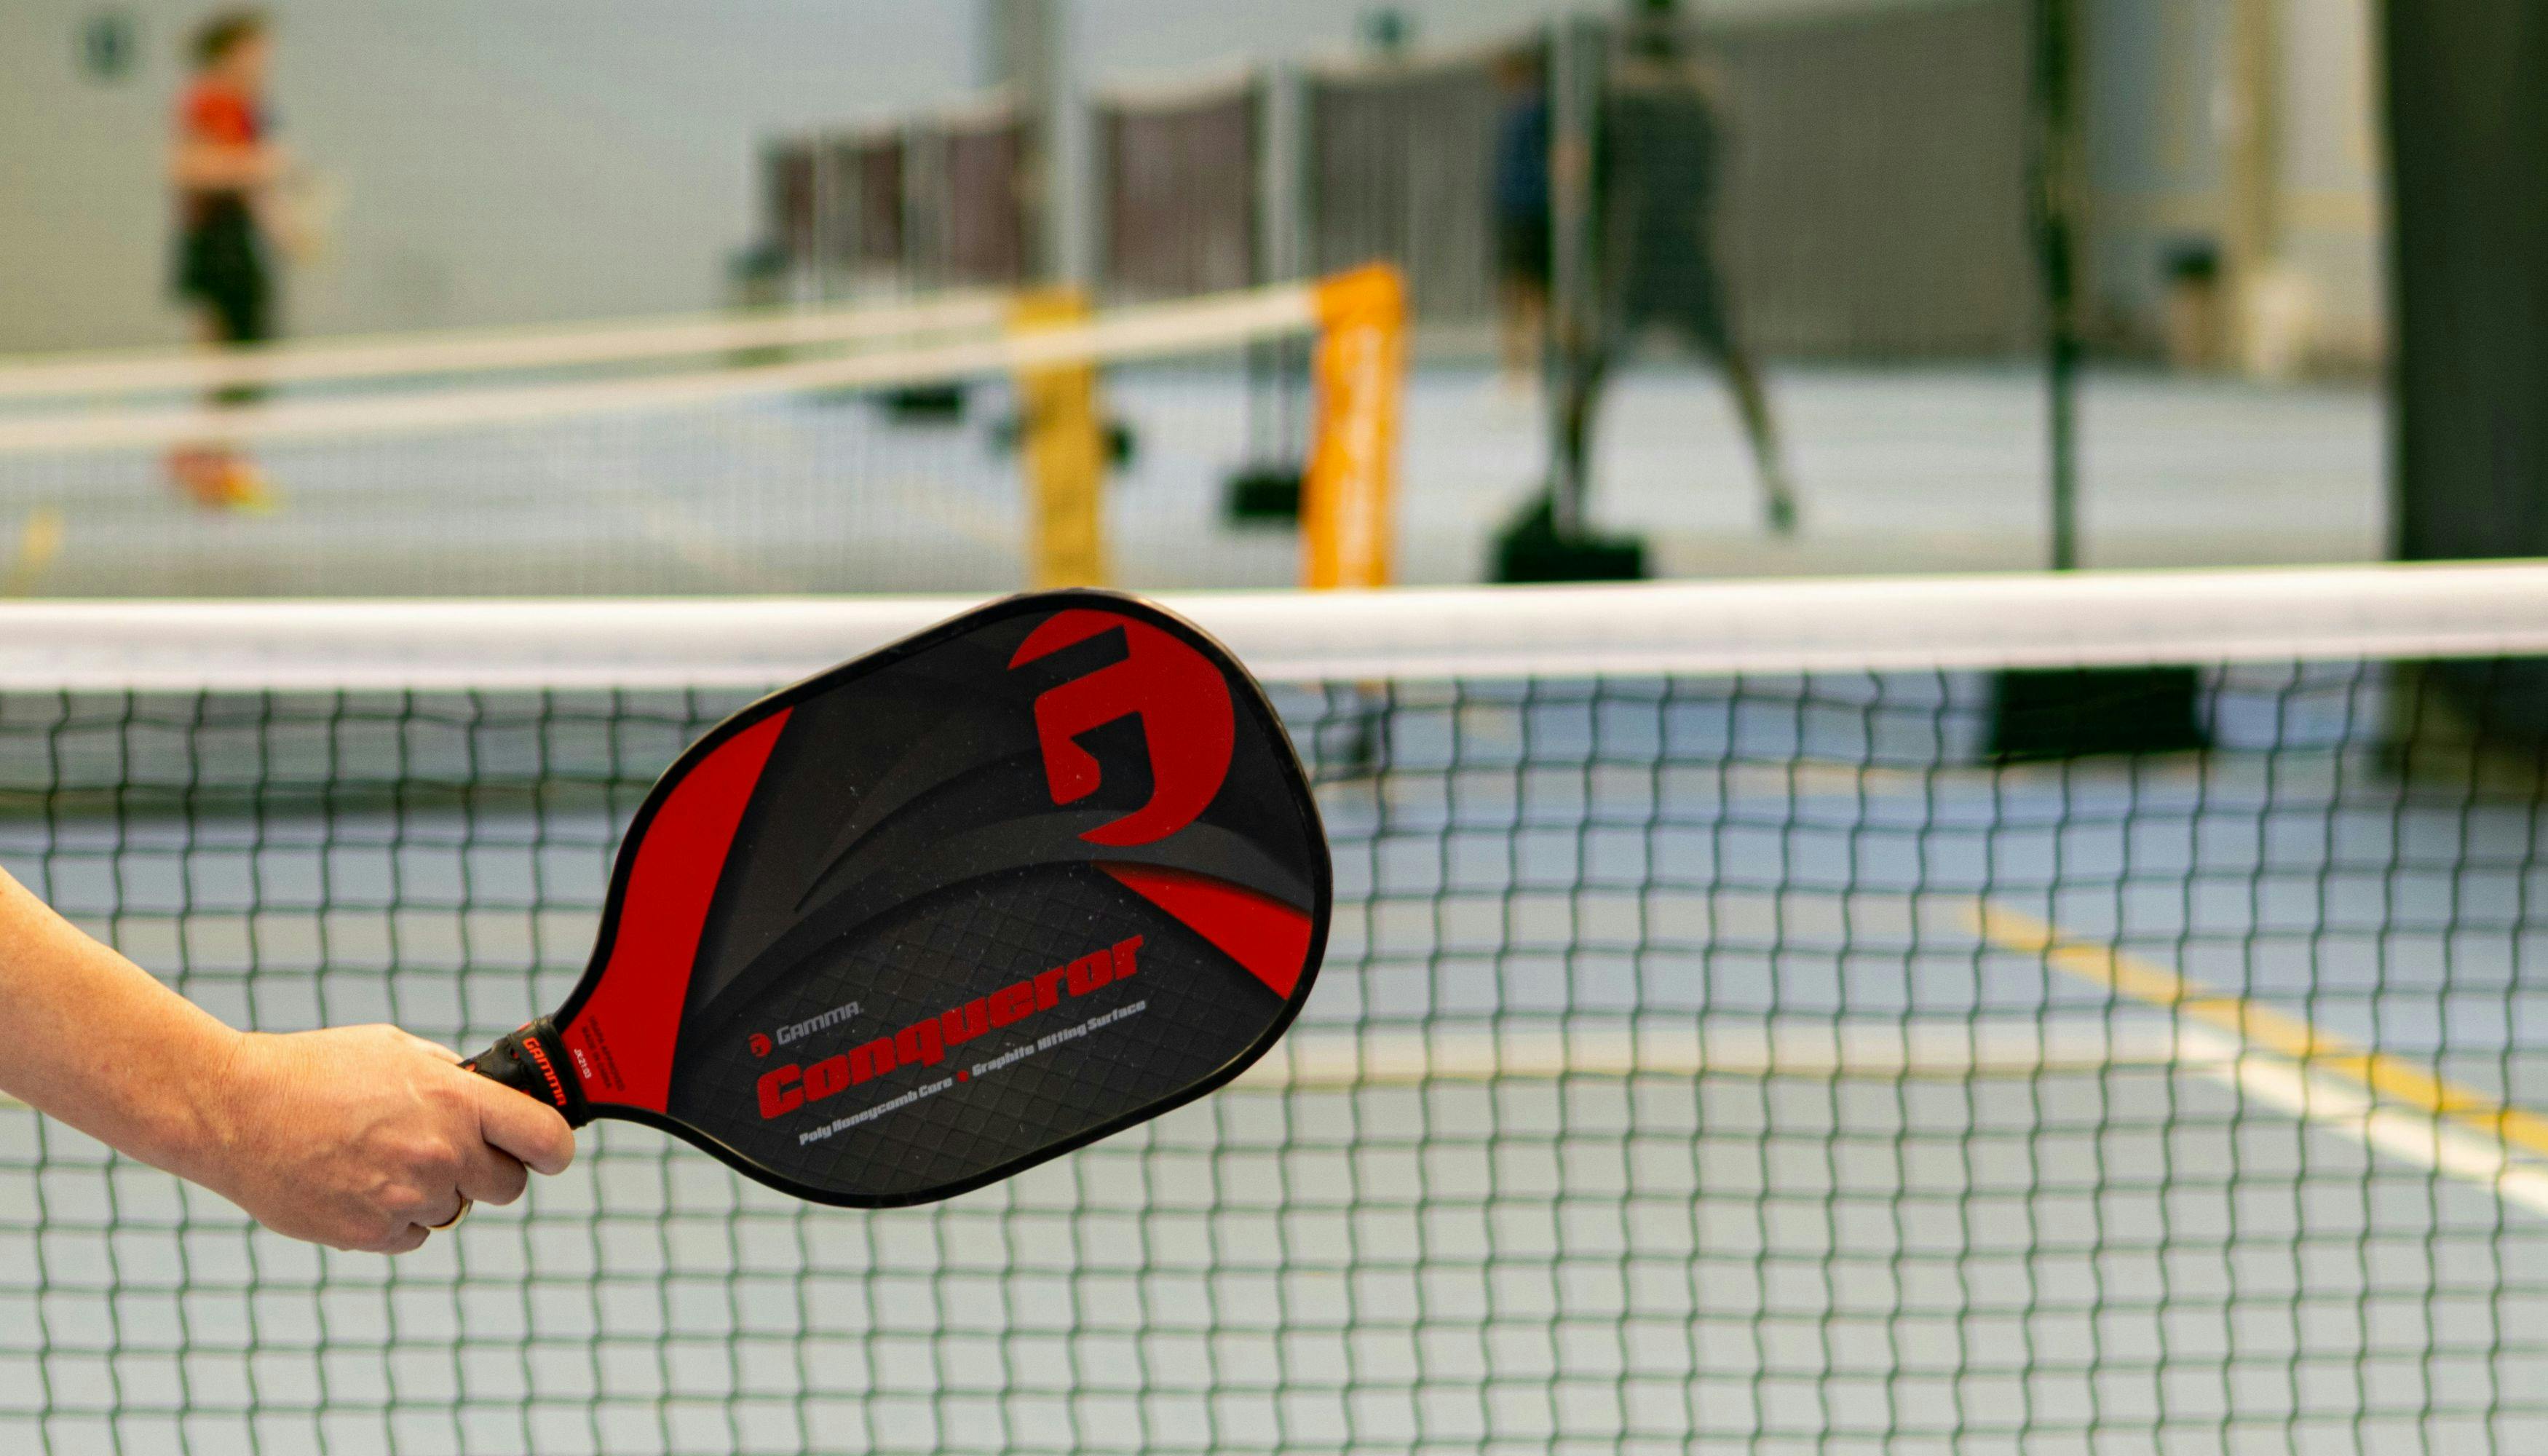 Pickleball paddle at the ready